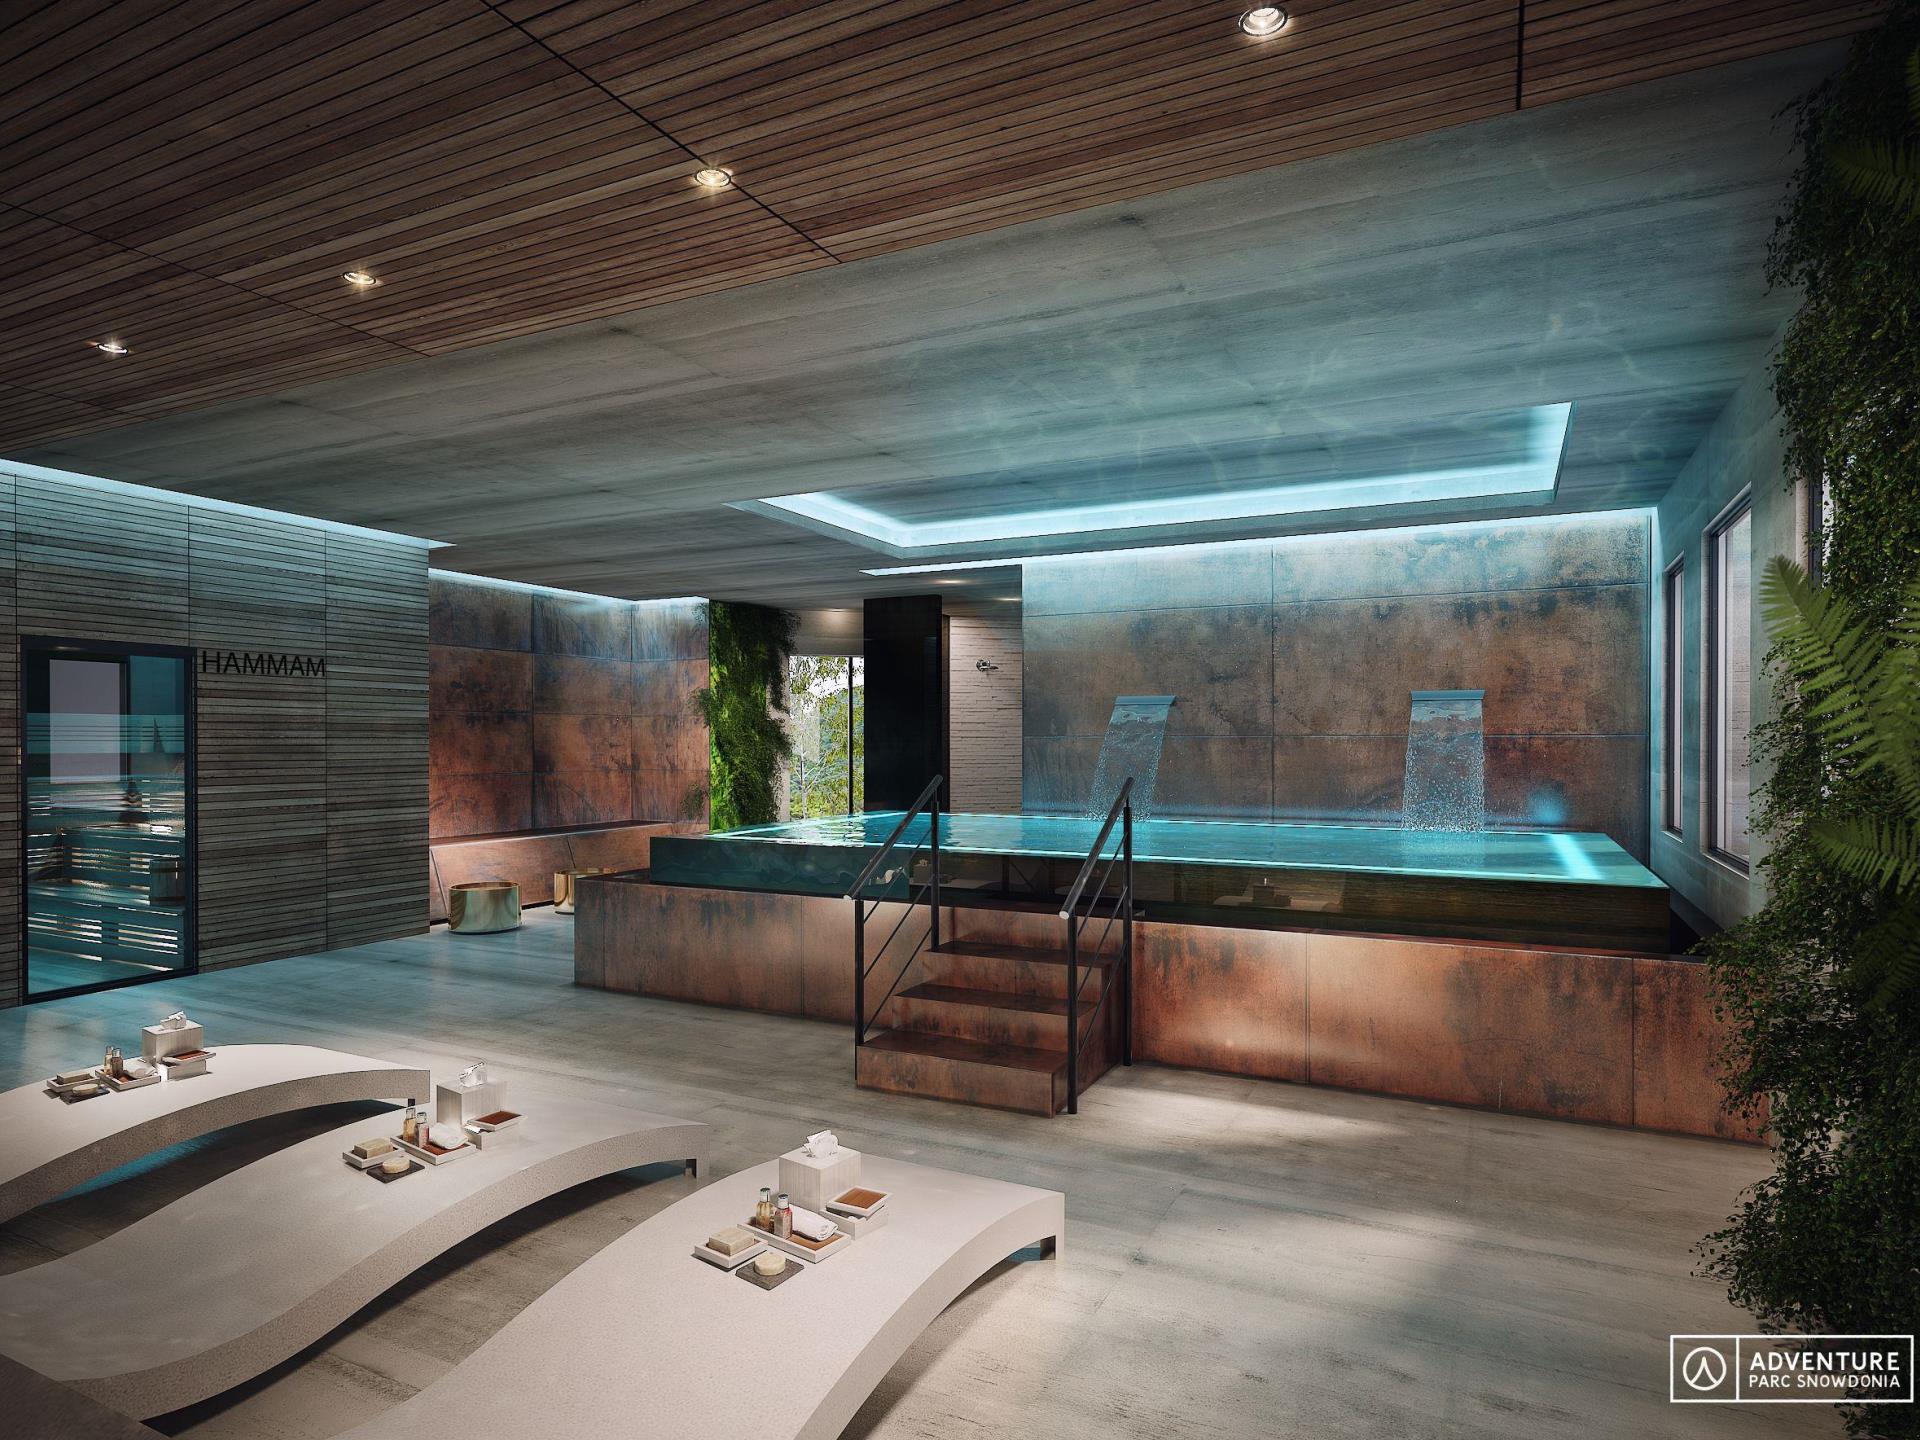 Artist's impression of the interior spa space